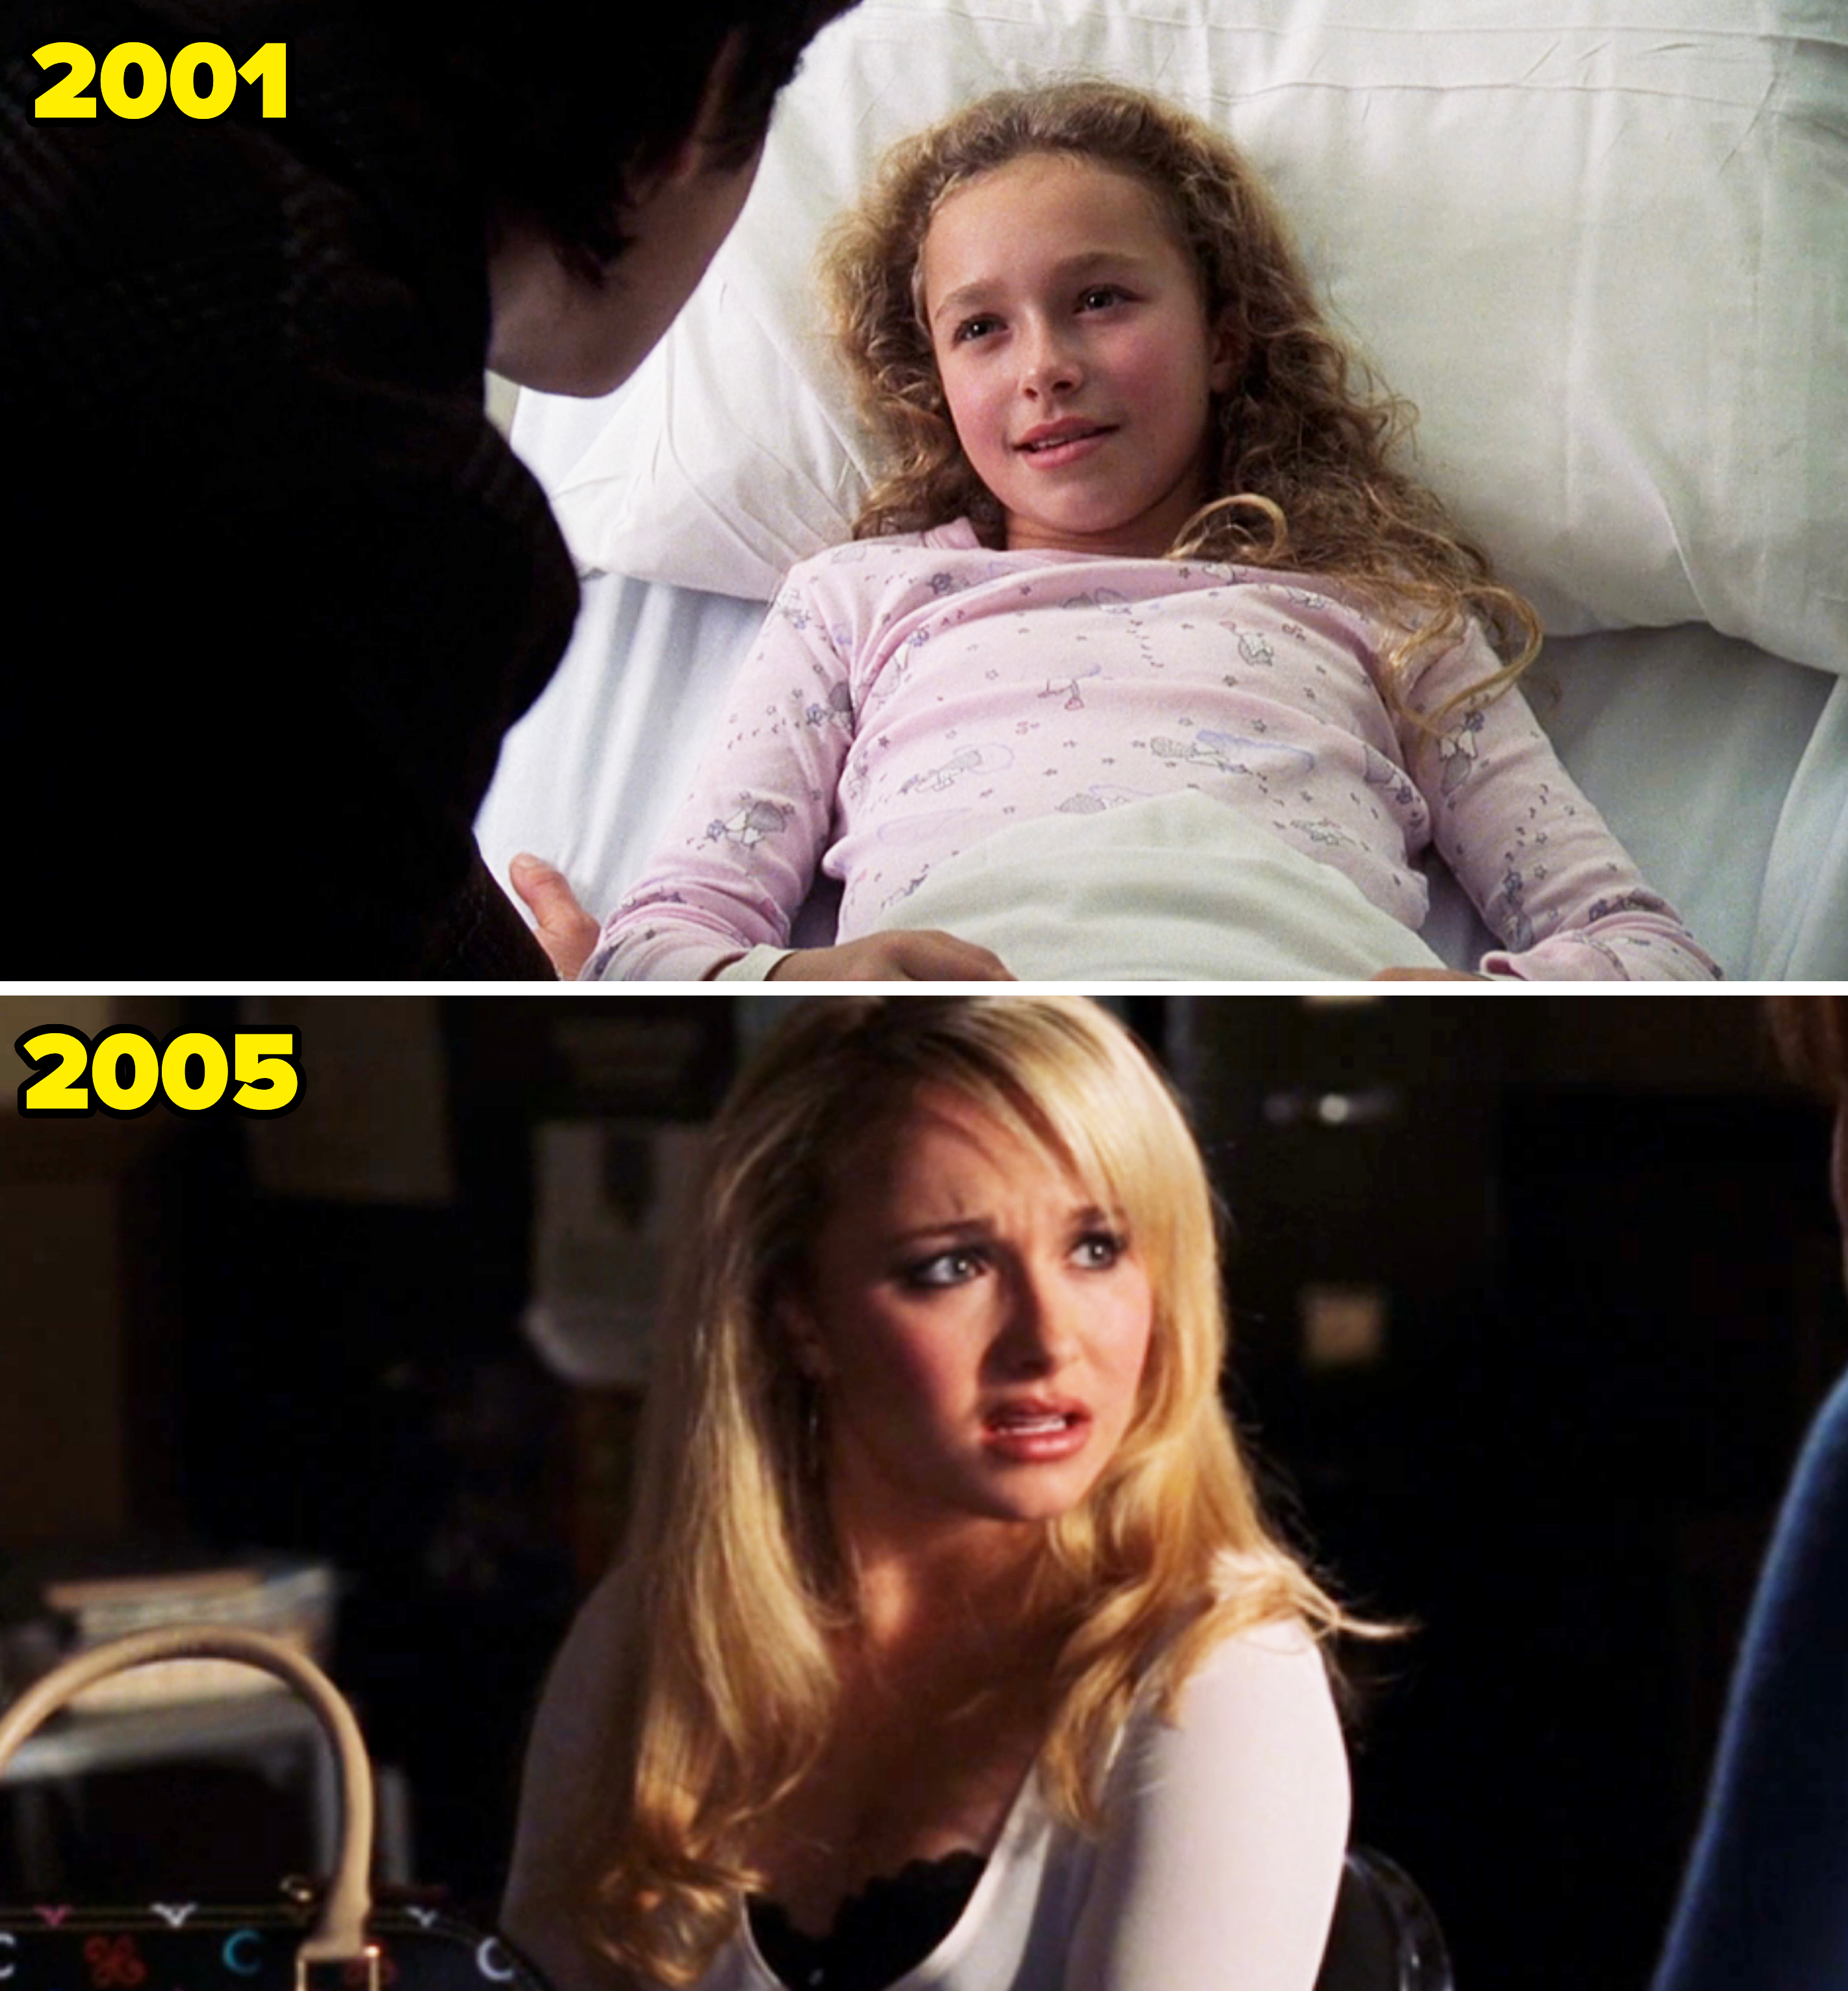 her as a young kid and then as a teen